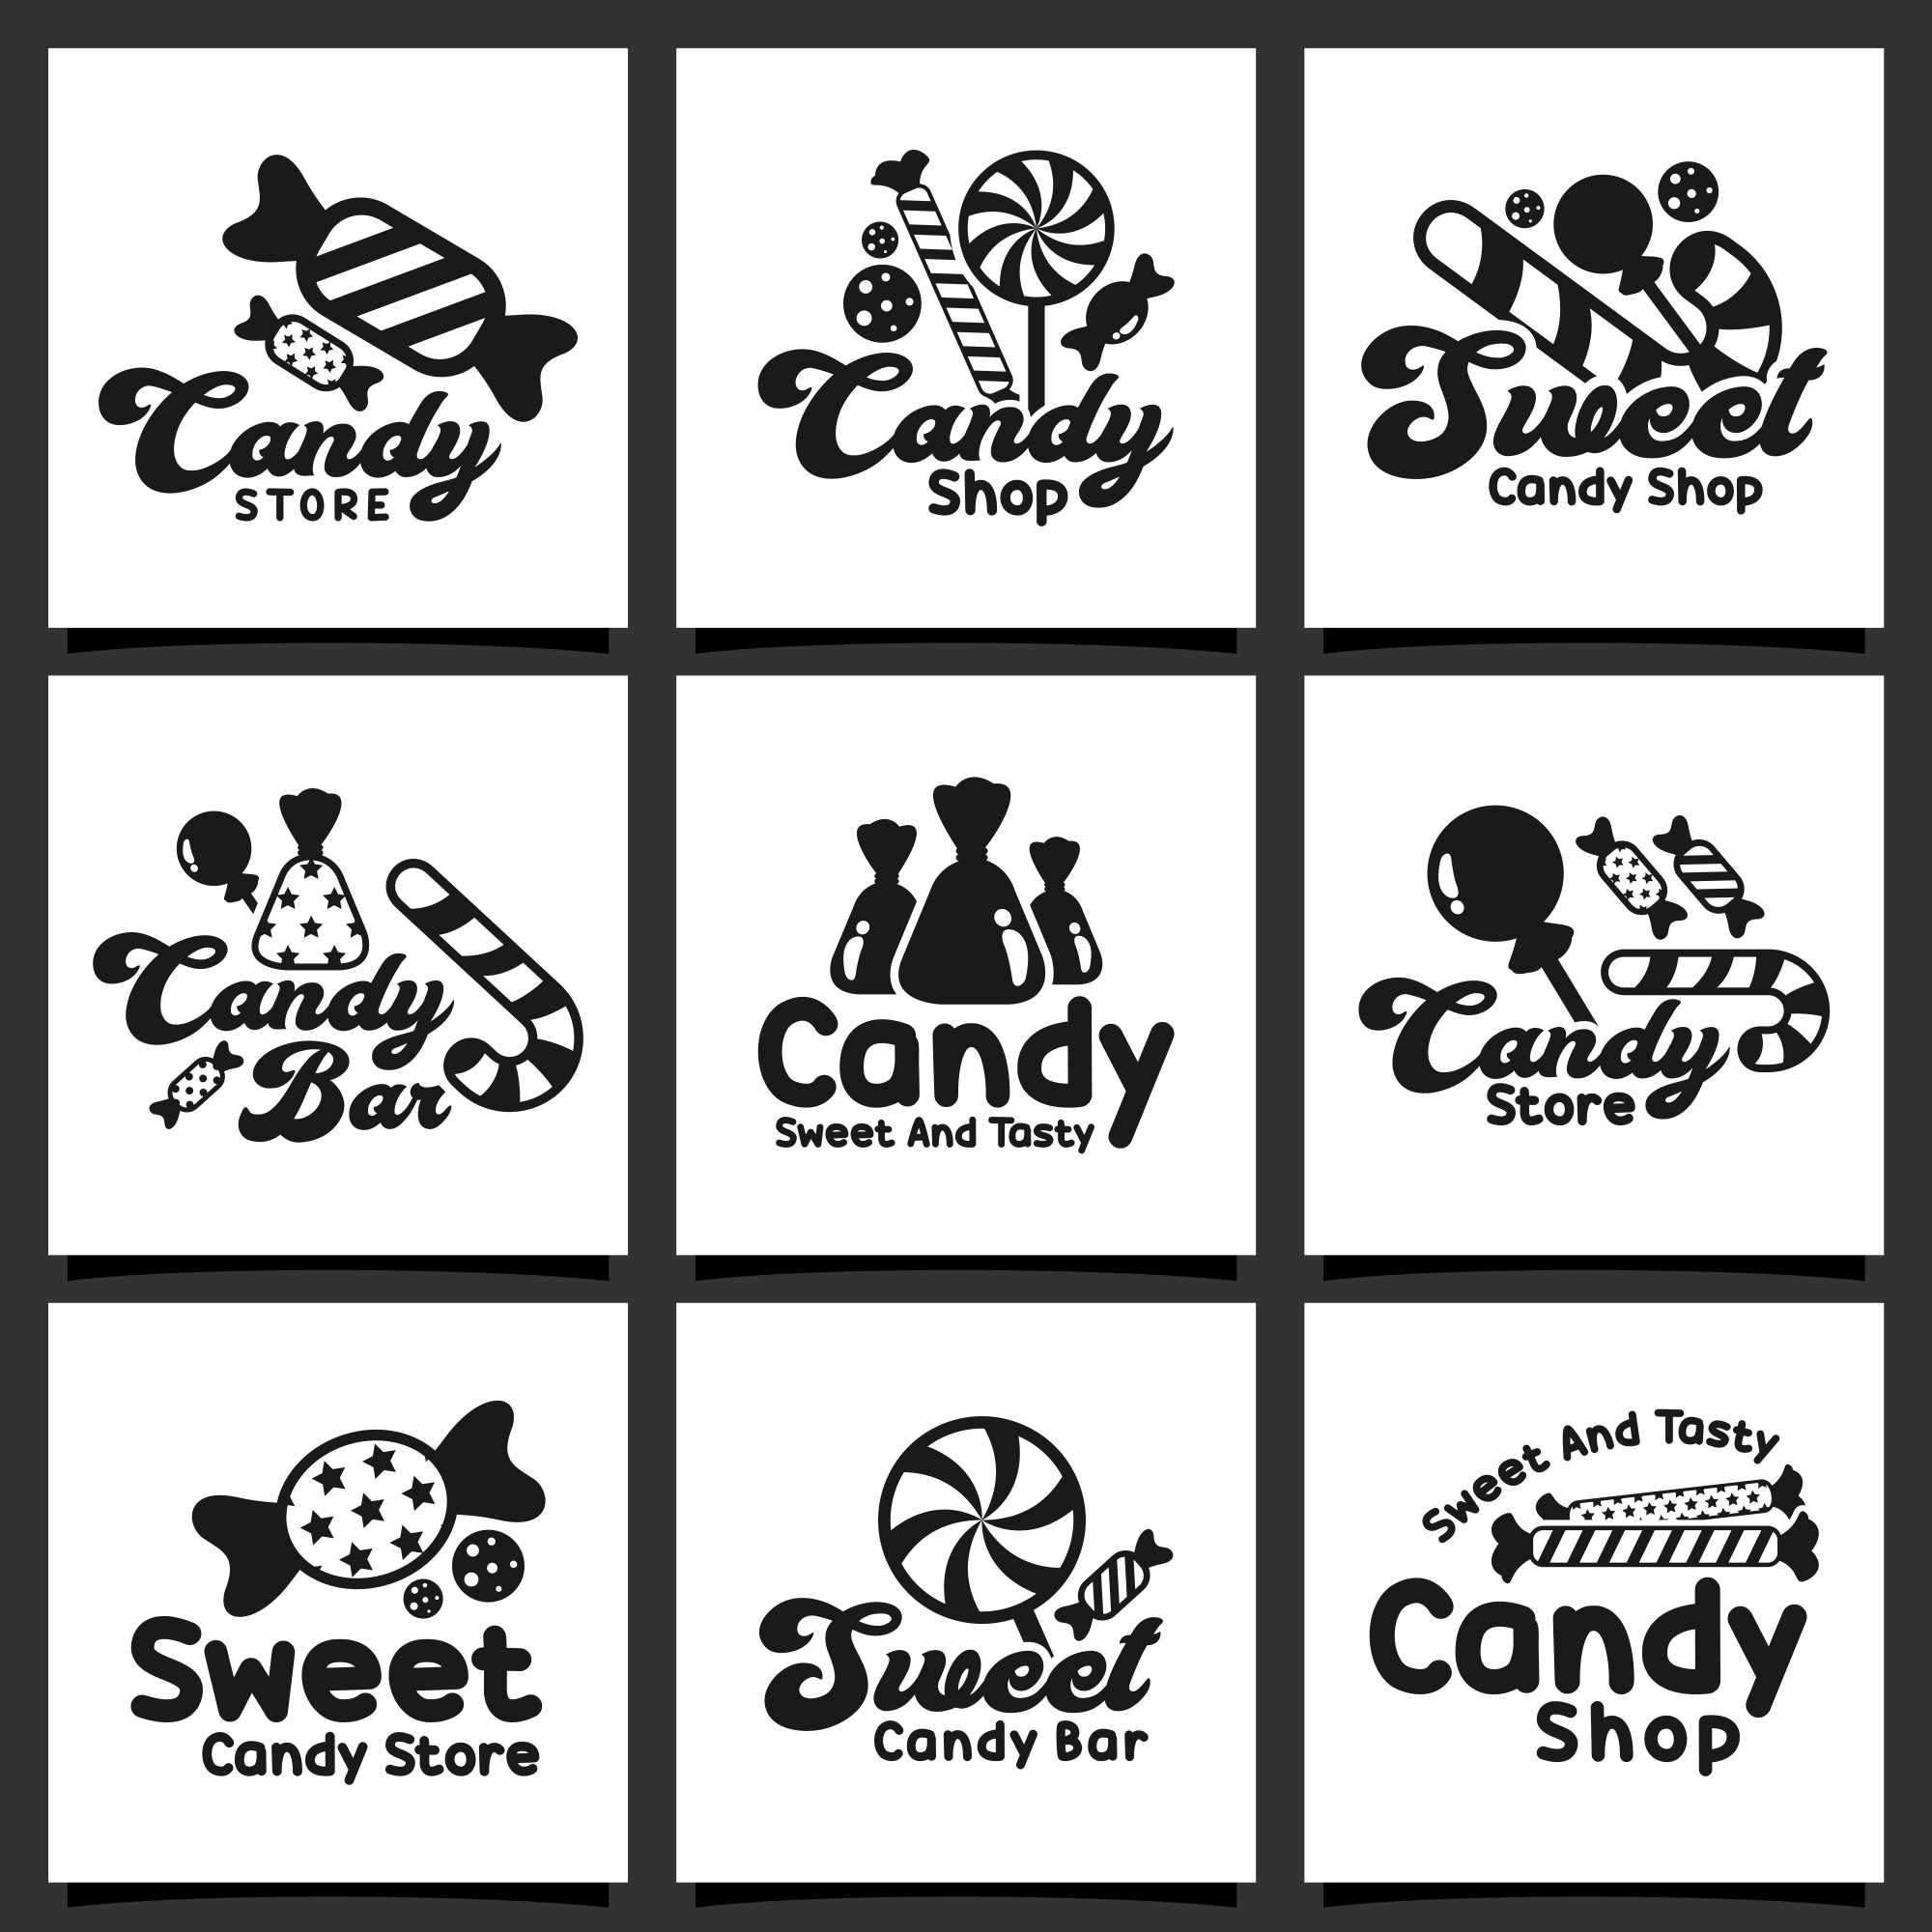 Sweets Shop Vector Lettering Logo Template With Sketch Candy Images Stock  Illustration - Download Image Now - iStock